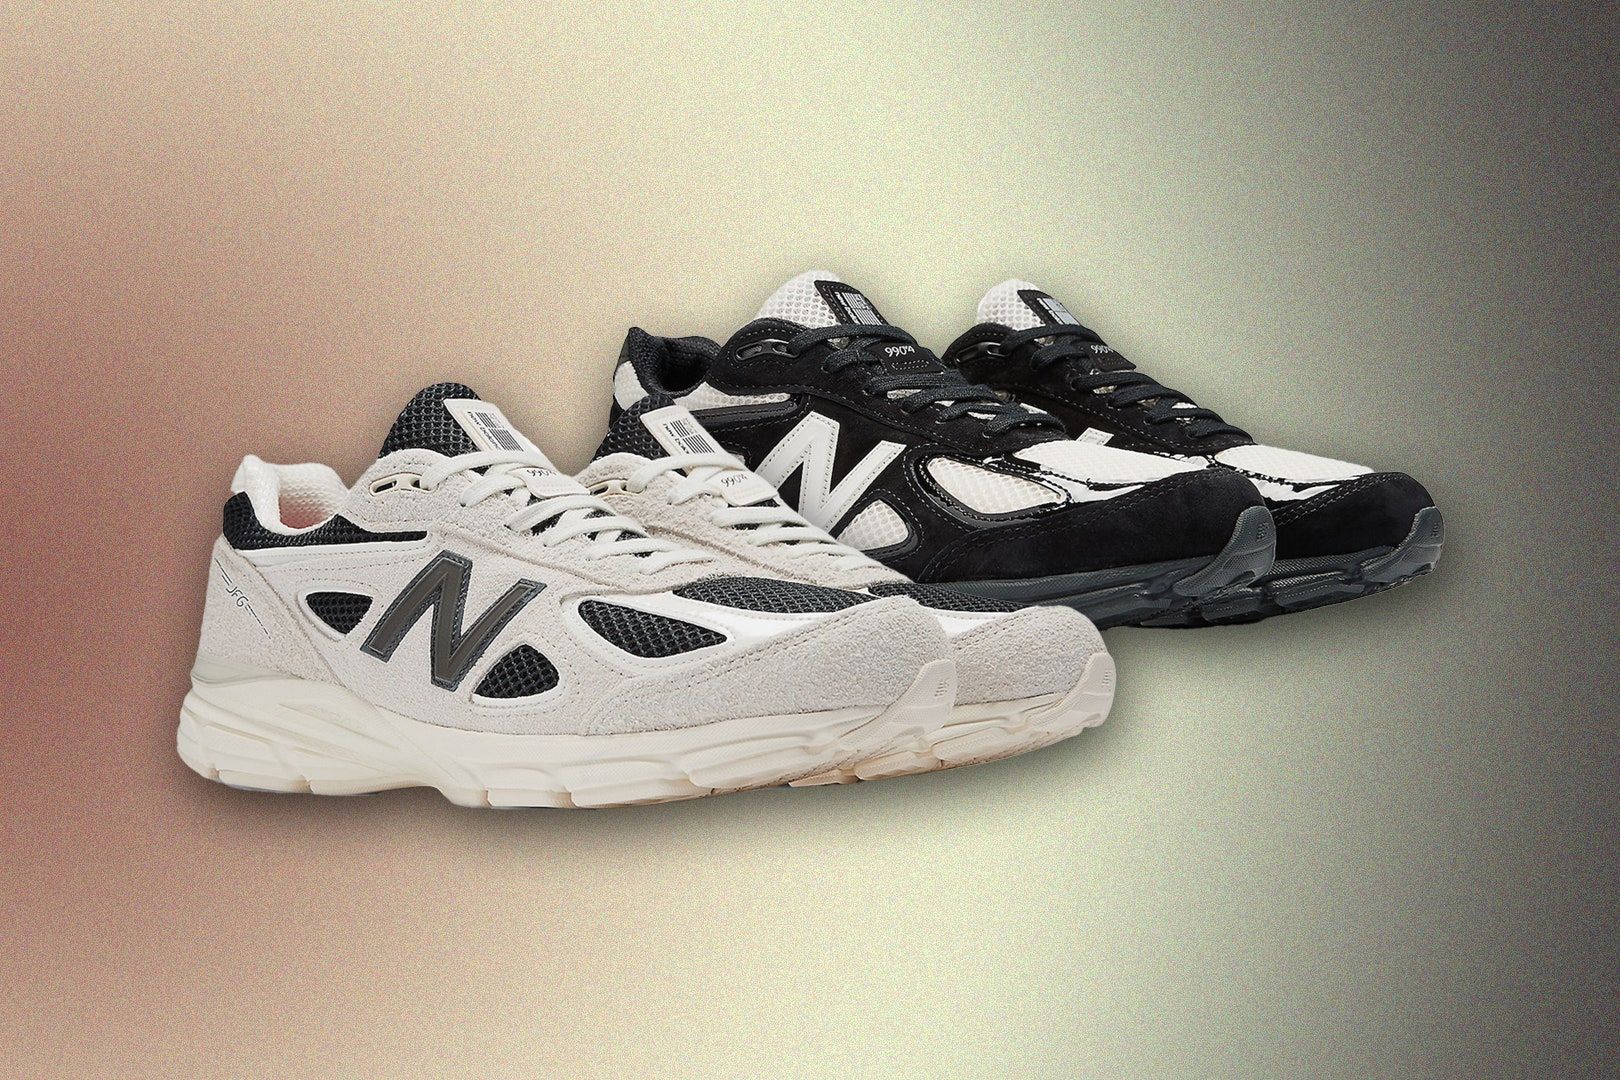 A pair of black and white New Balance 990v4 sneakers on a tan gradient background - New Balance